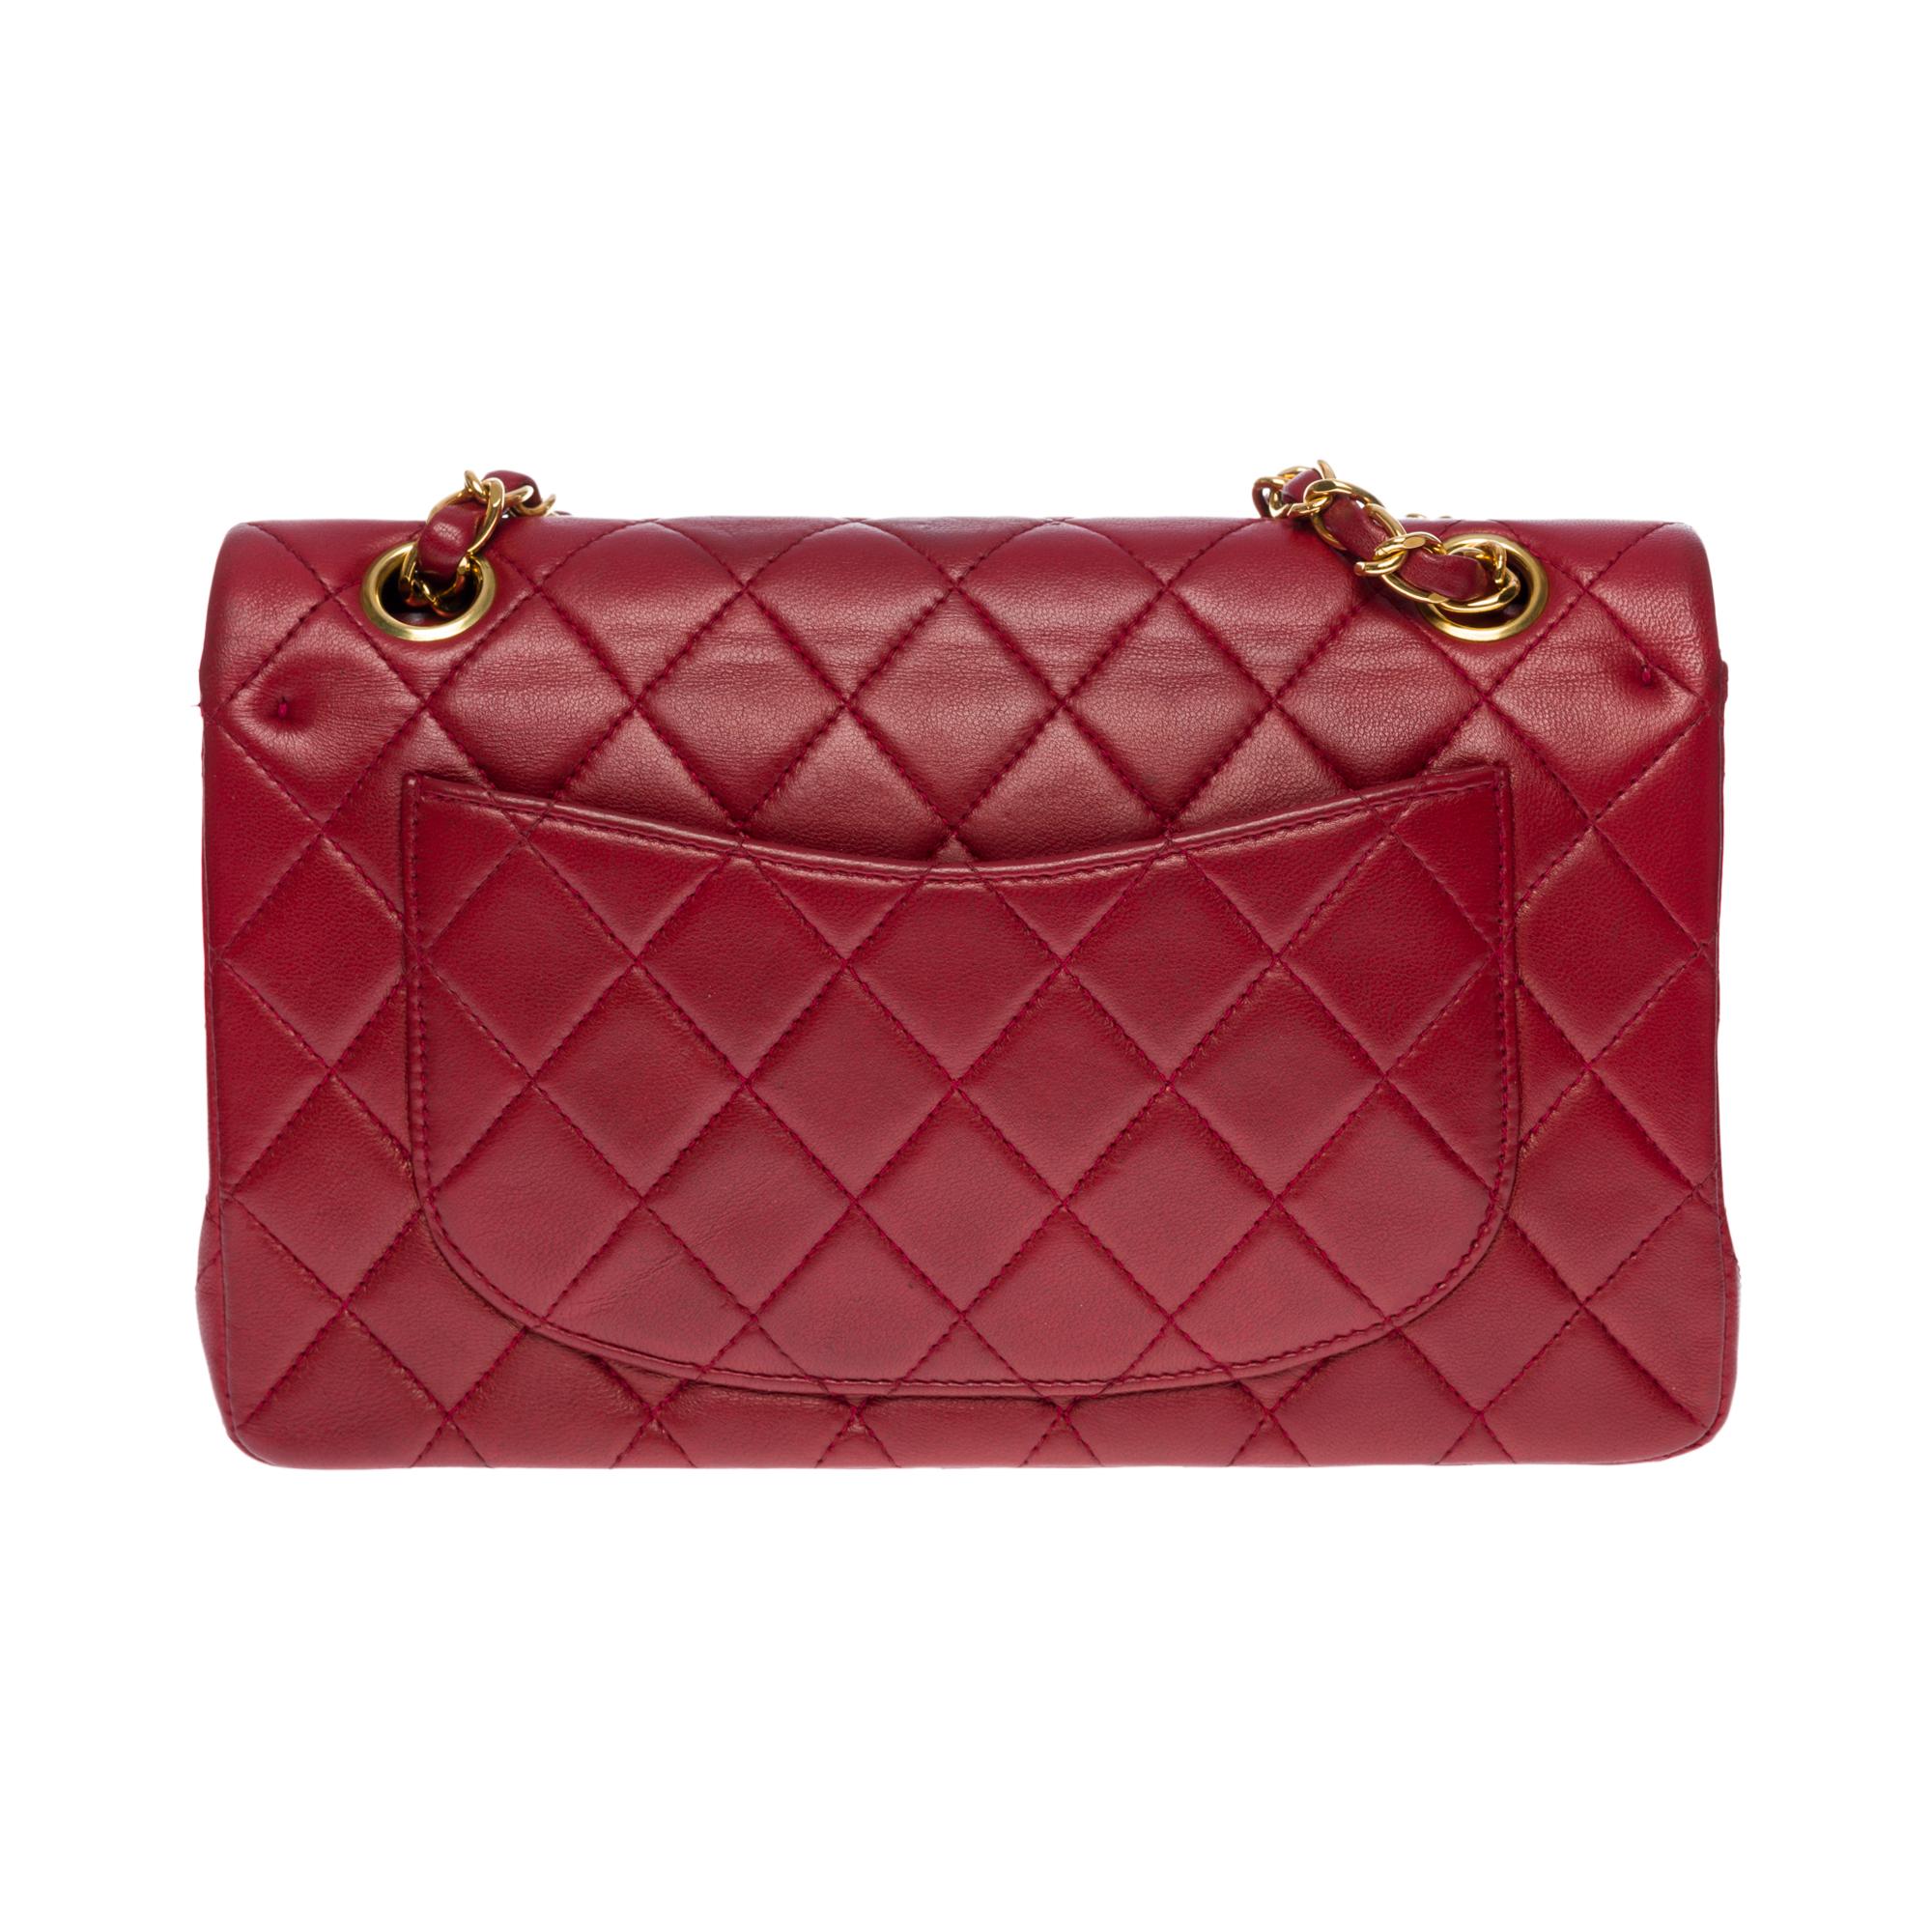 The coveted Chanel Timeless 23 cm double flap shoulder bag in garnet red quilted leather, gold metal hardware, gold metal chain interwoven with red leather for a shoulder and crossbody

Backpack pocket
Flap closure, gold-tone CC clasp
Double